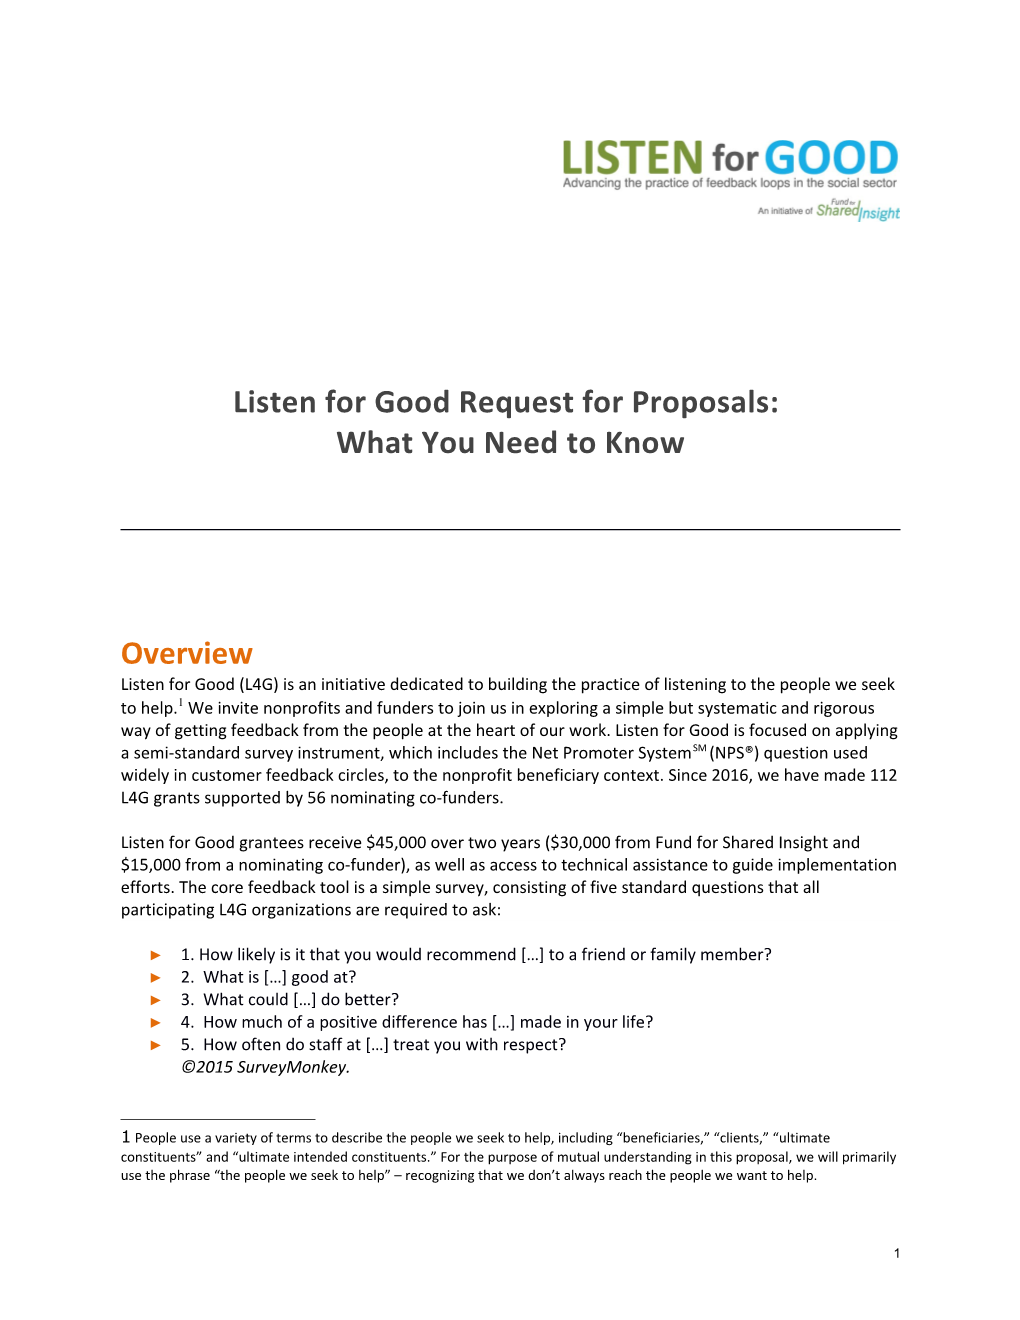 Listen for Good Request for Proposals: What You Need to Know